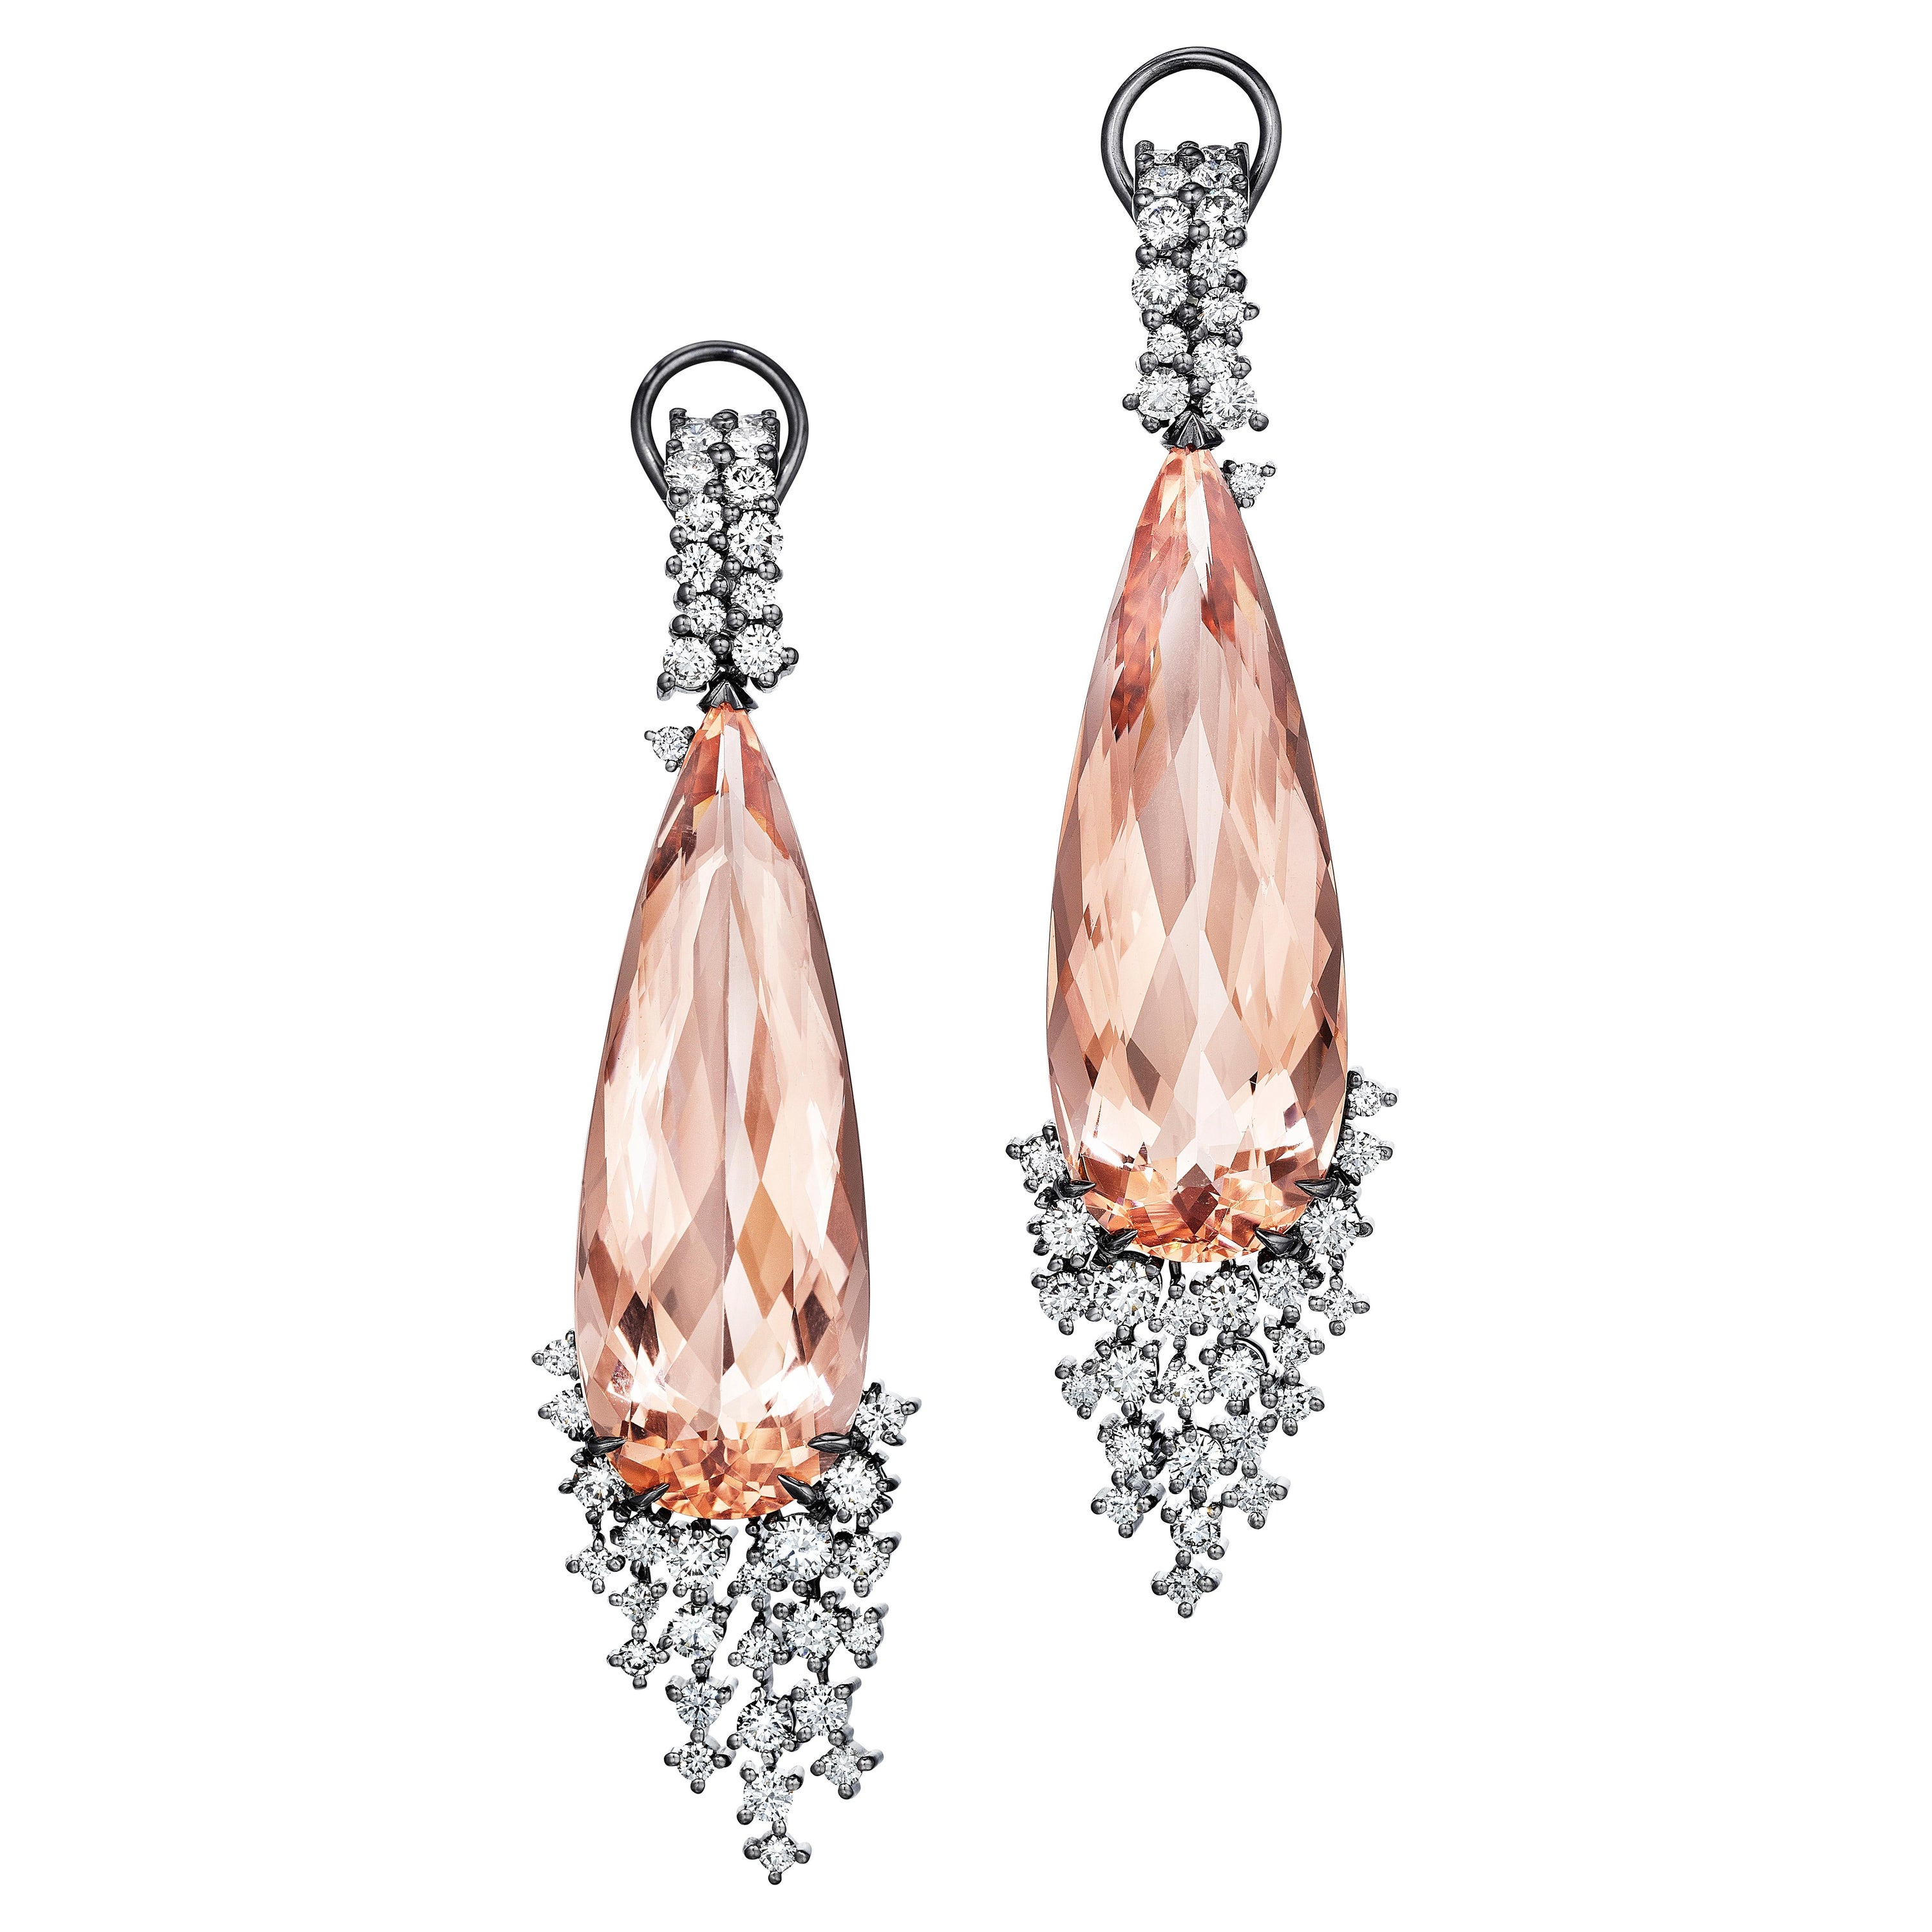 Melting Ice Morganite and Diamond Drop Earrings by MadStone